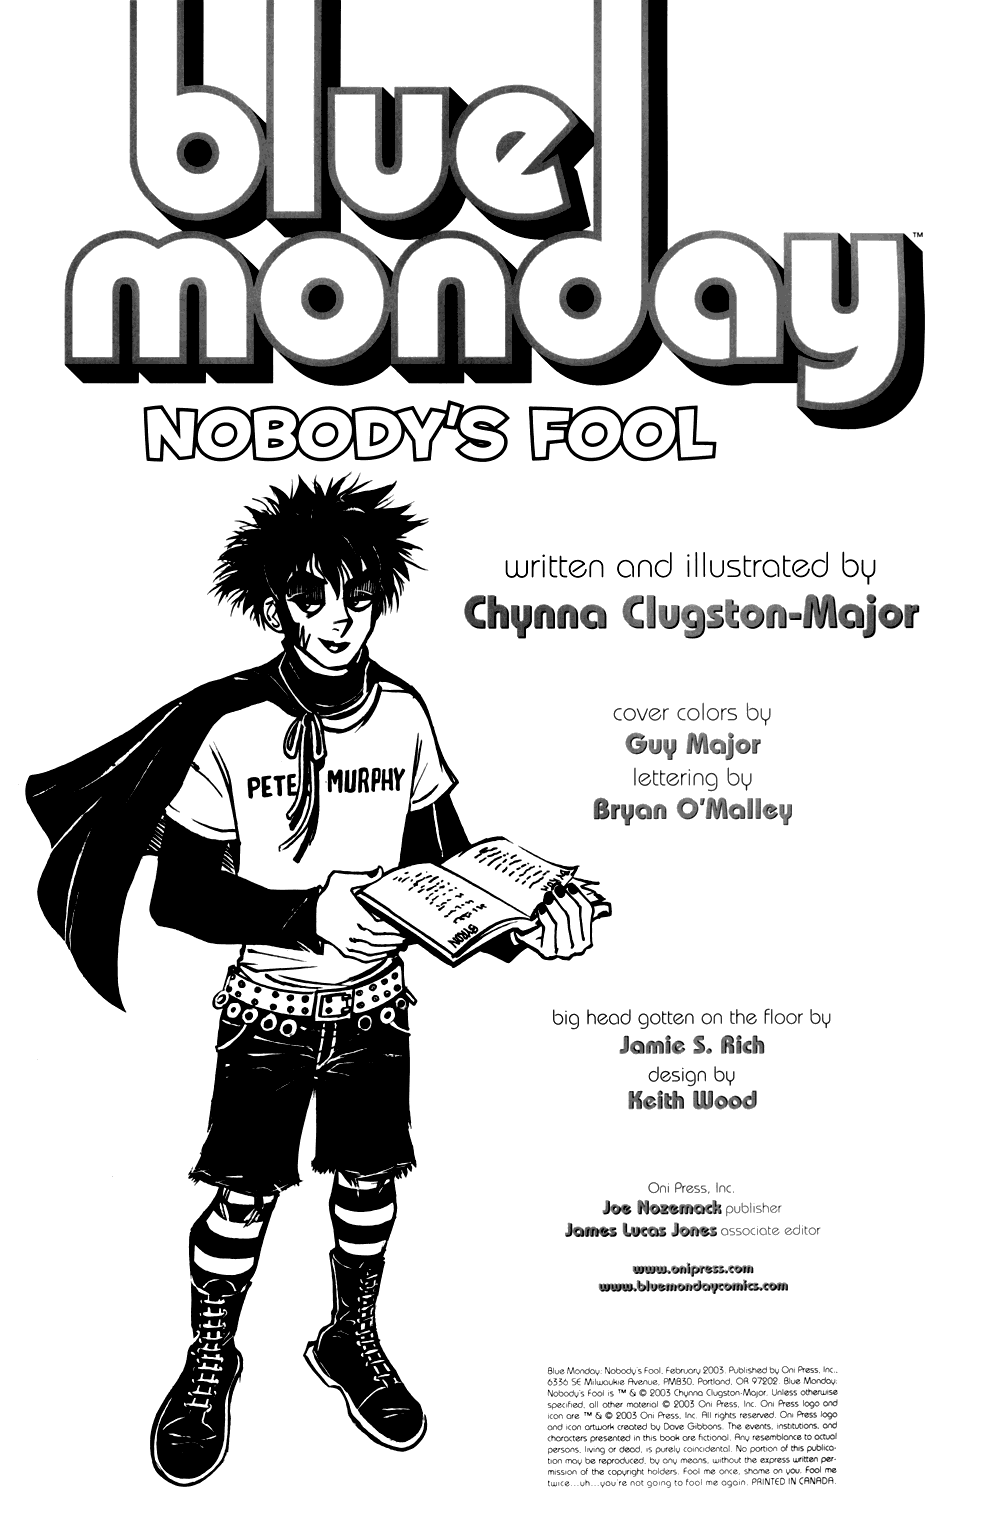 Read online Blue Monday: Nobody's Fool comic -  Issue # Full - 2